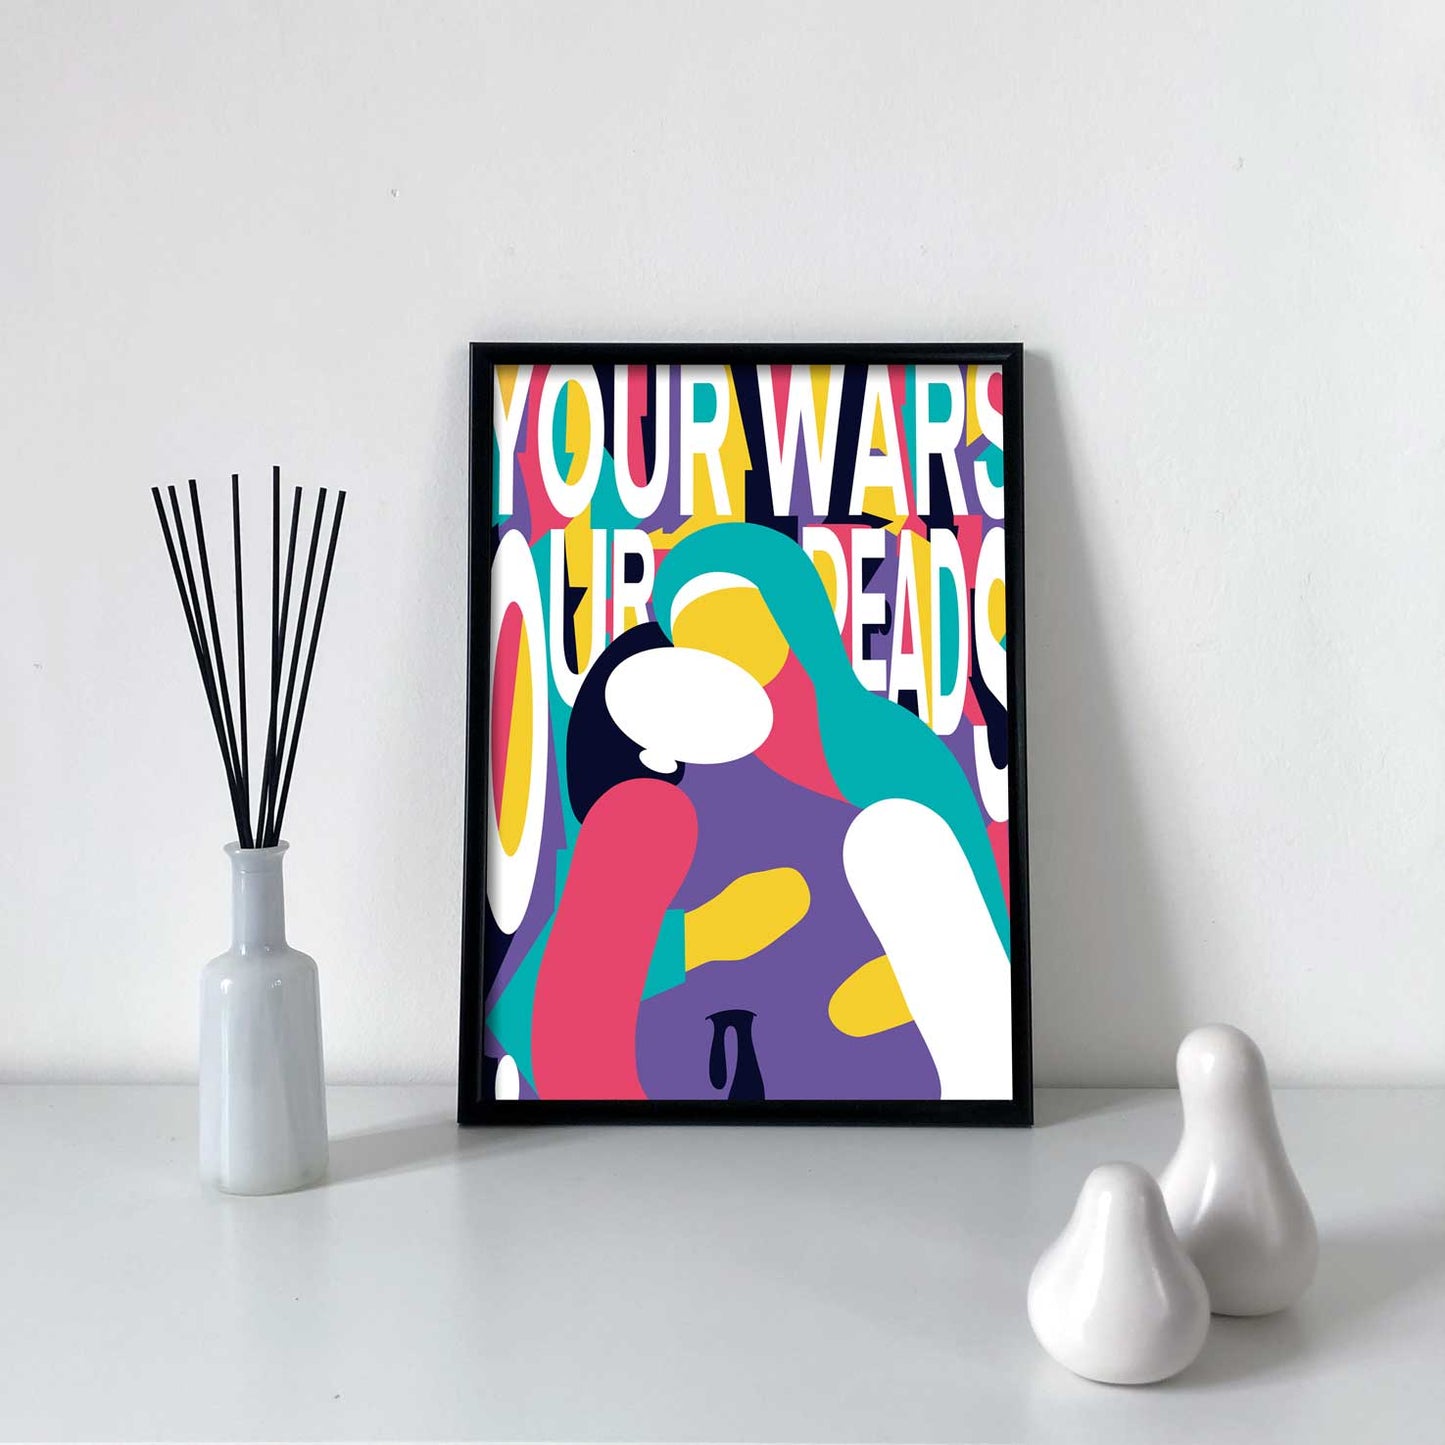 YOUR WARS OUR DEADS: Stampa Digitale a Colori  - 29,7x42 - Poster Art